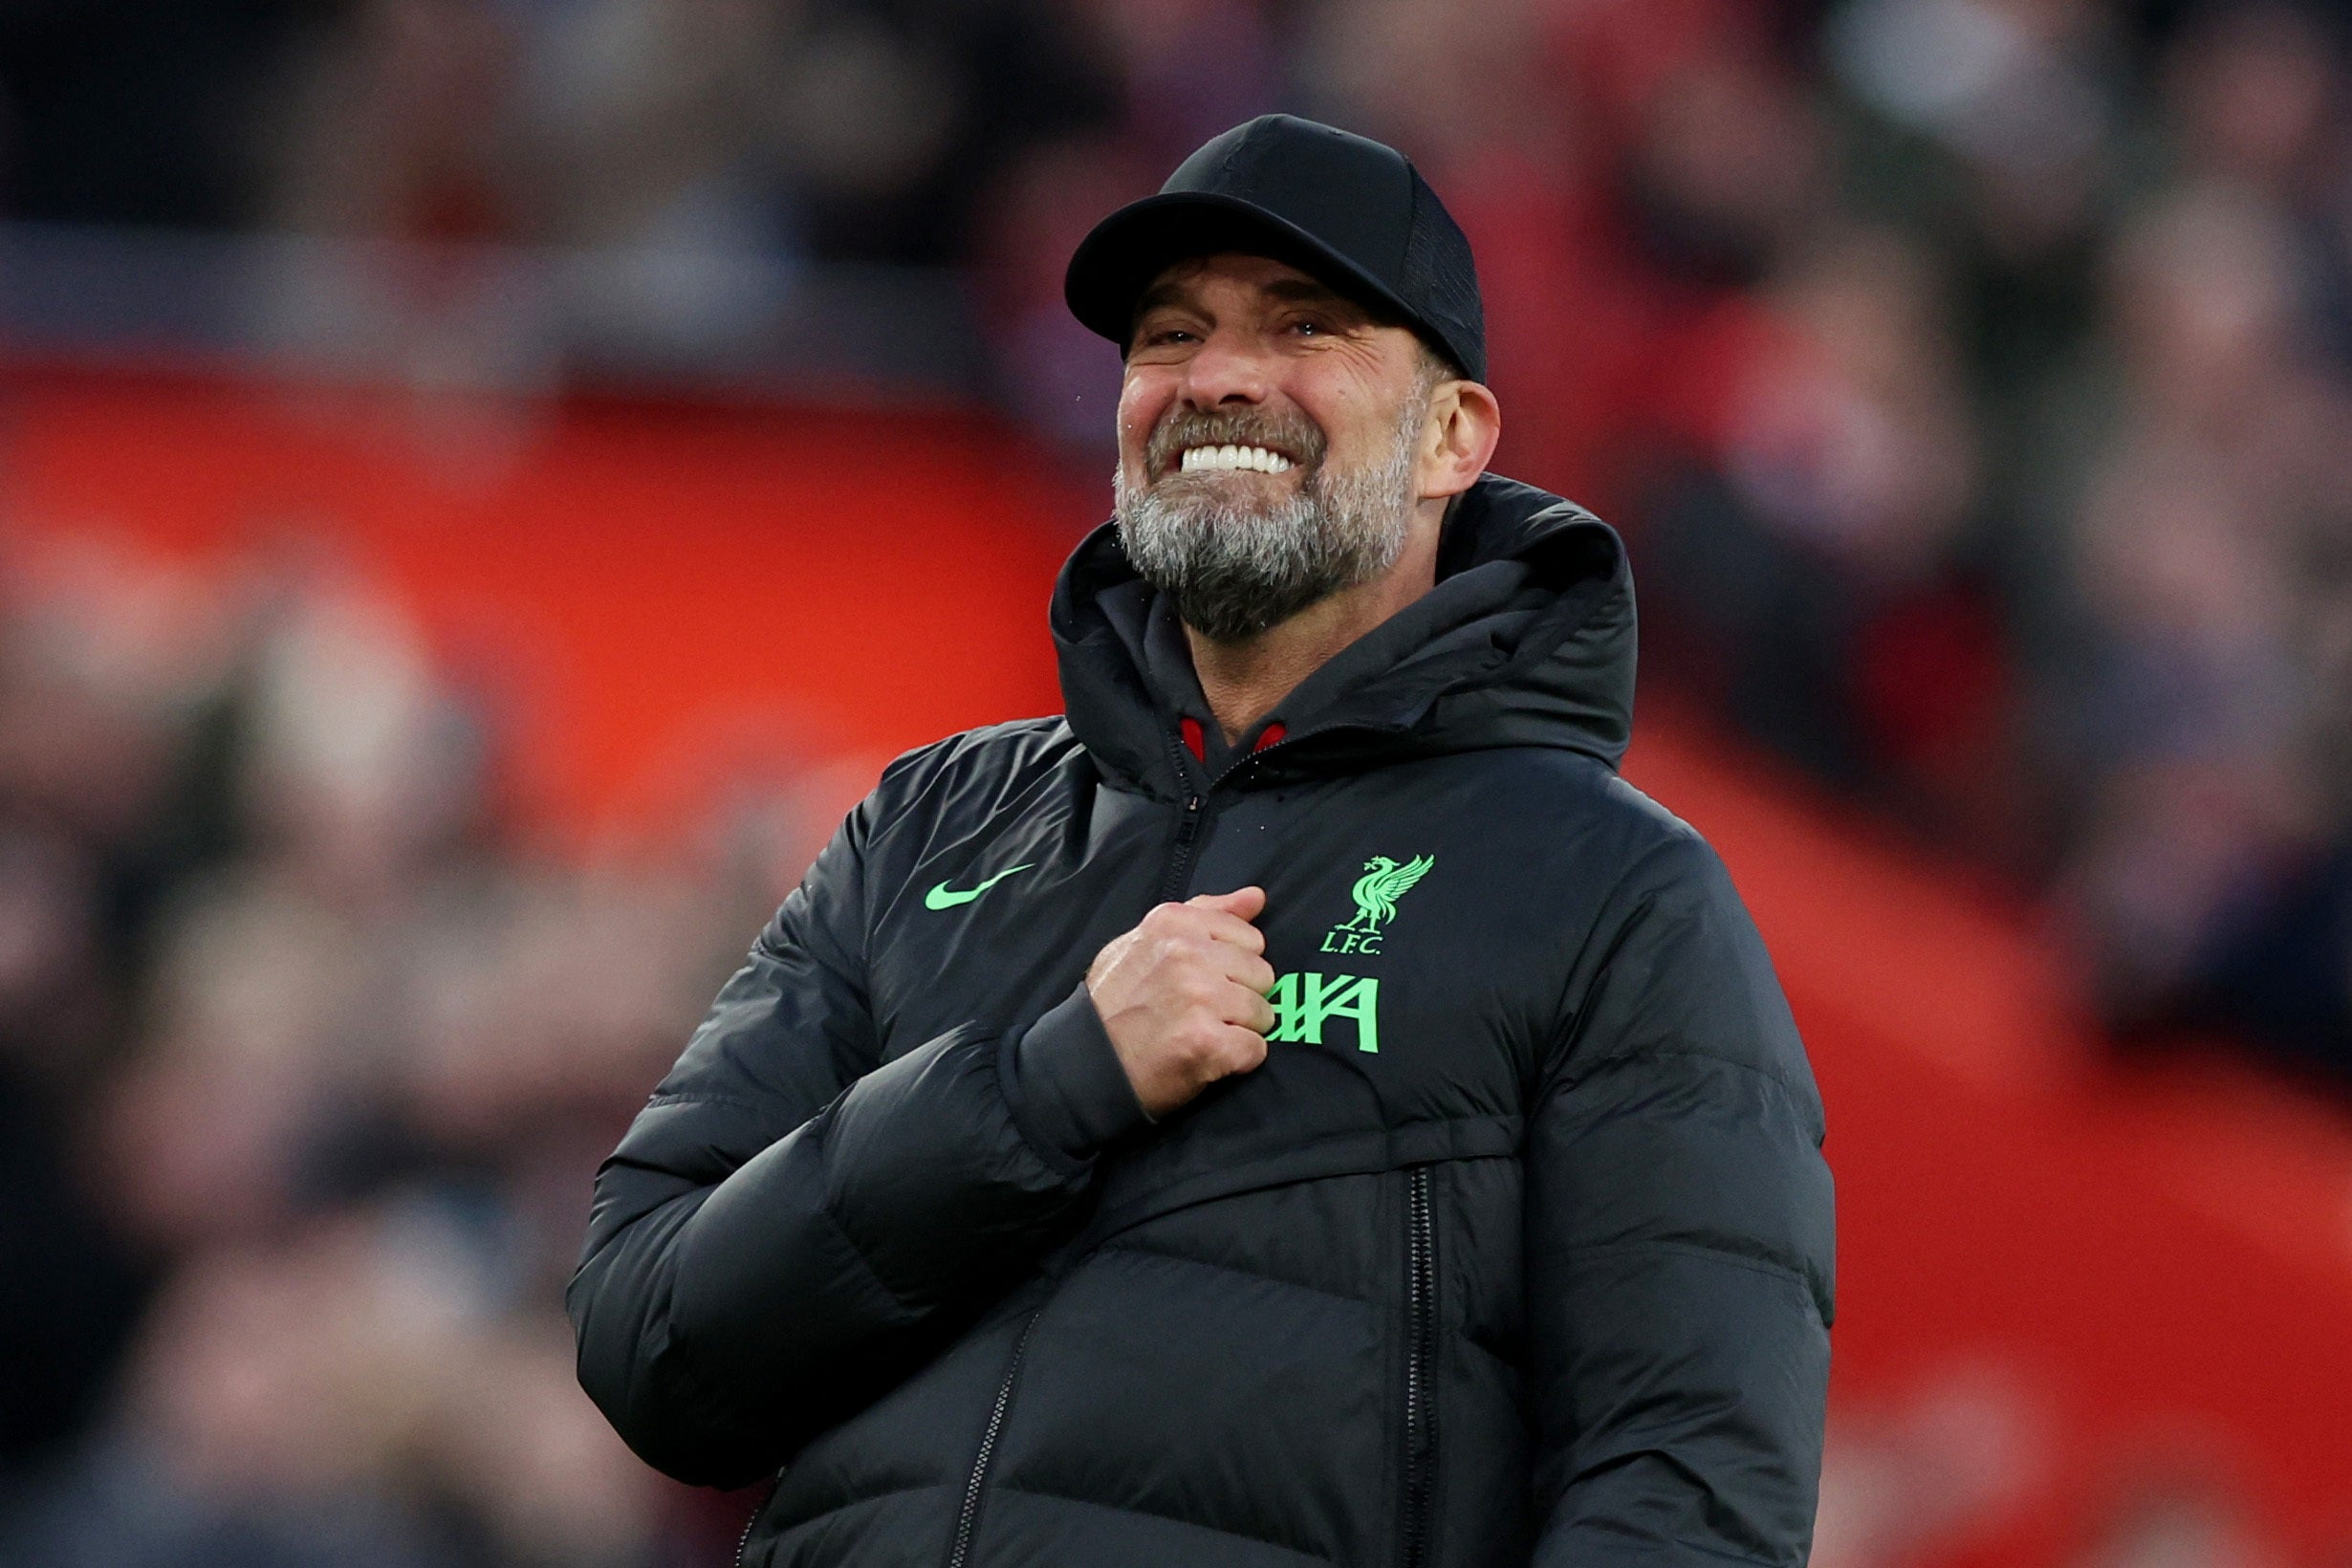 Jurgen Klopp’s time at Liverpool is coming to an end